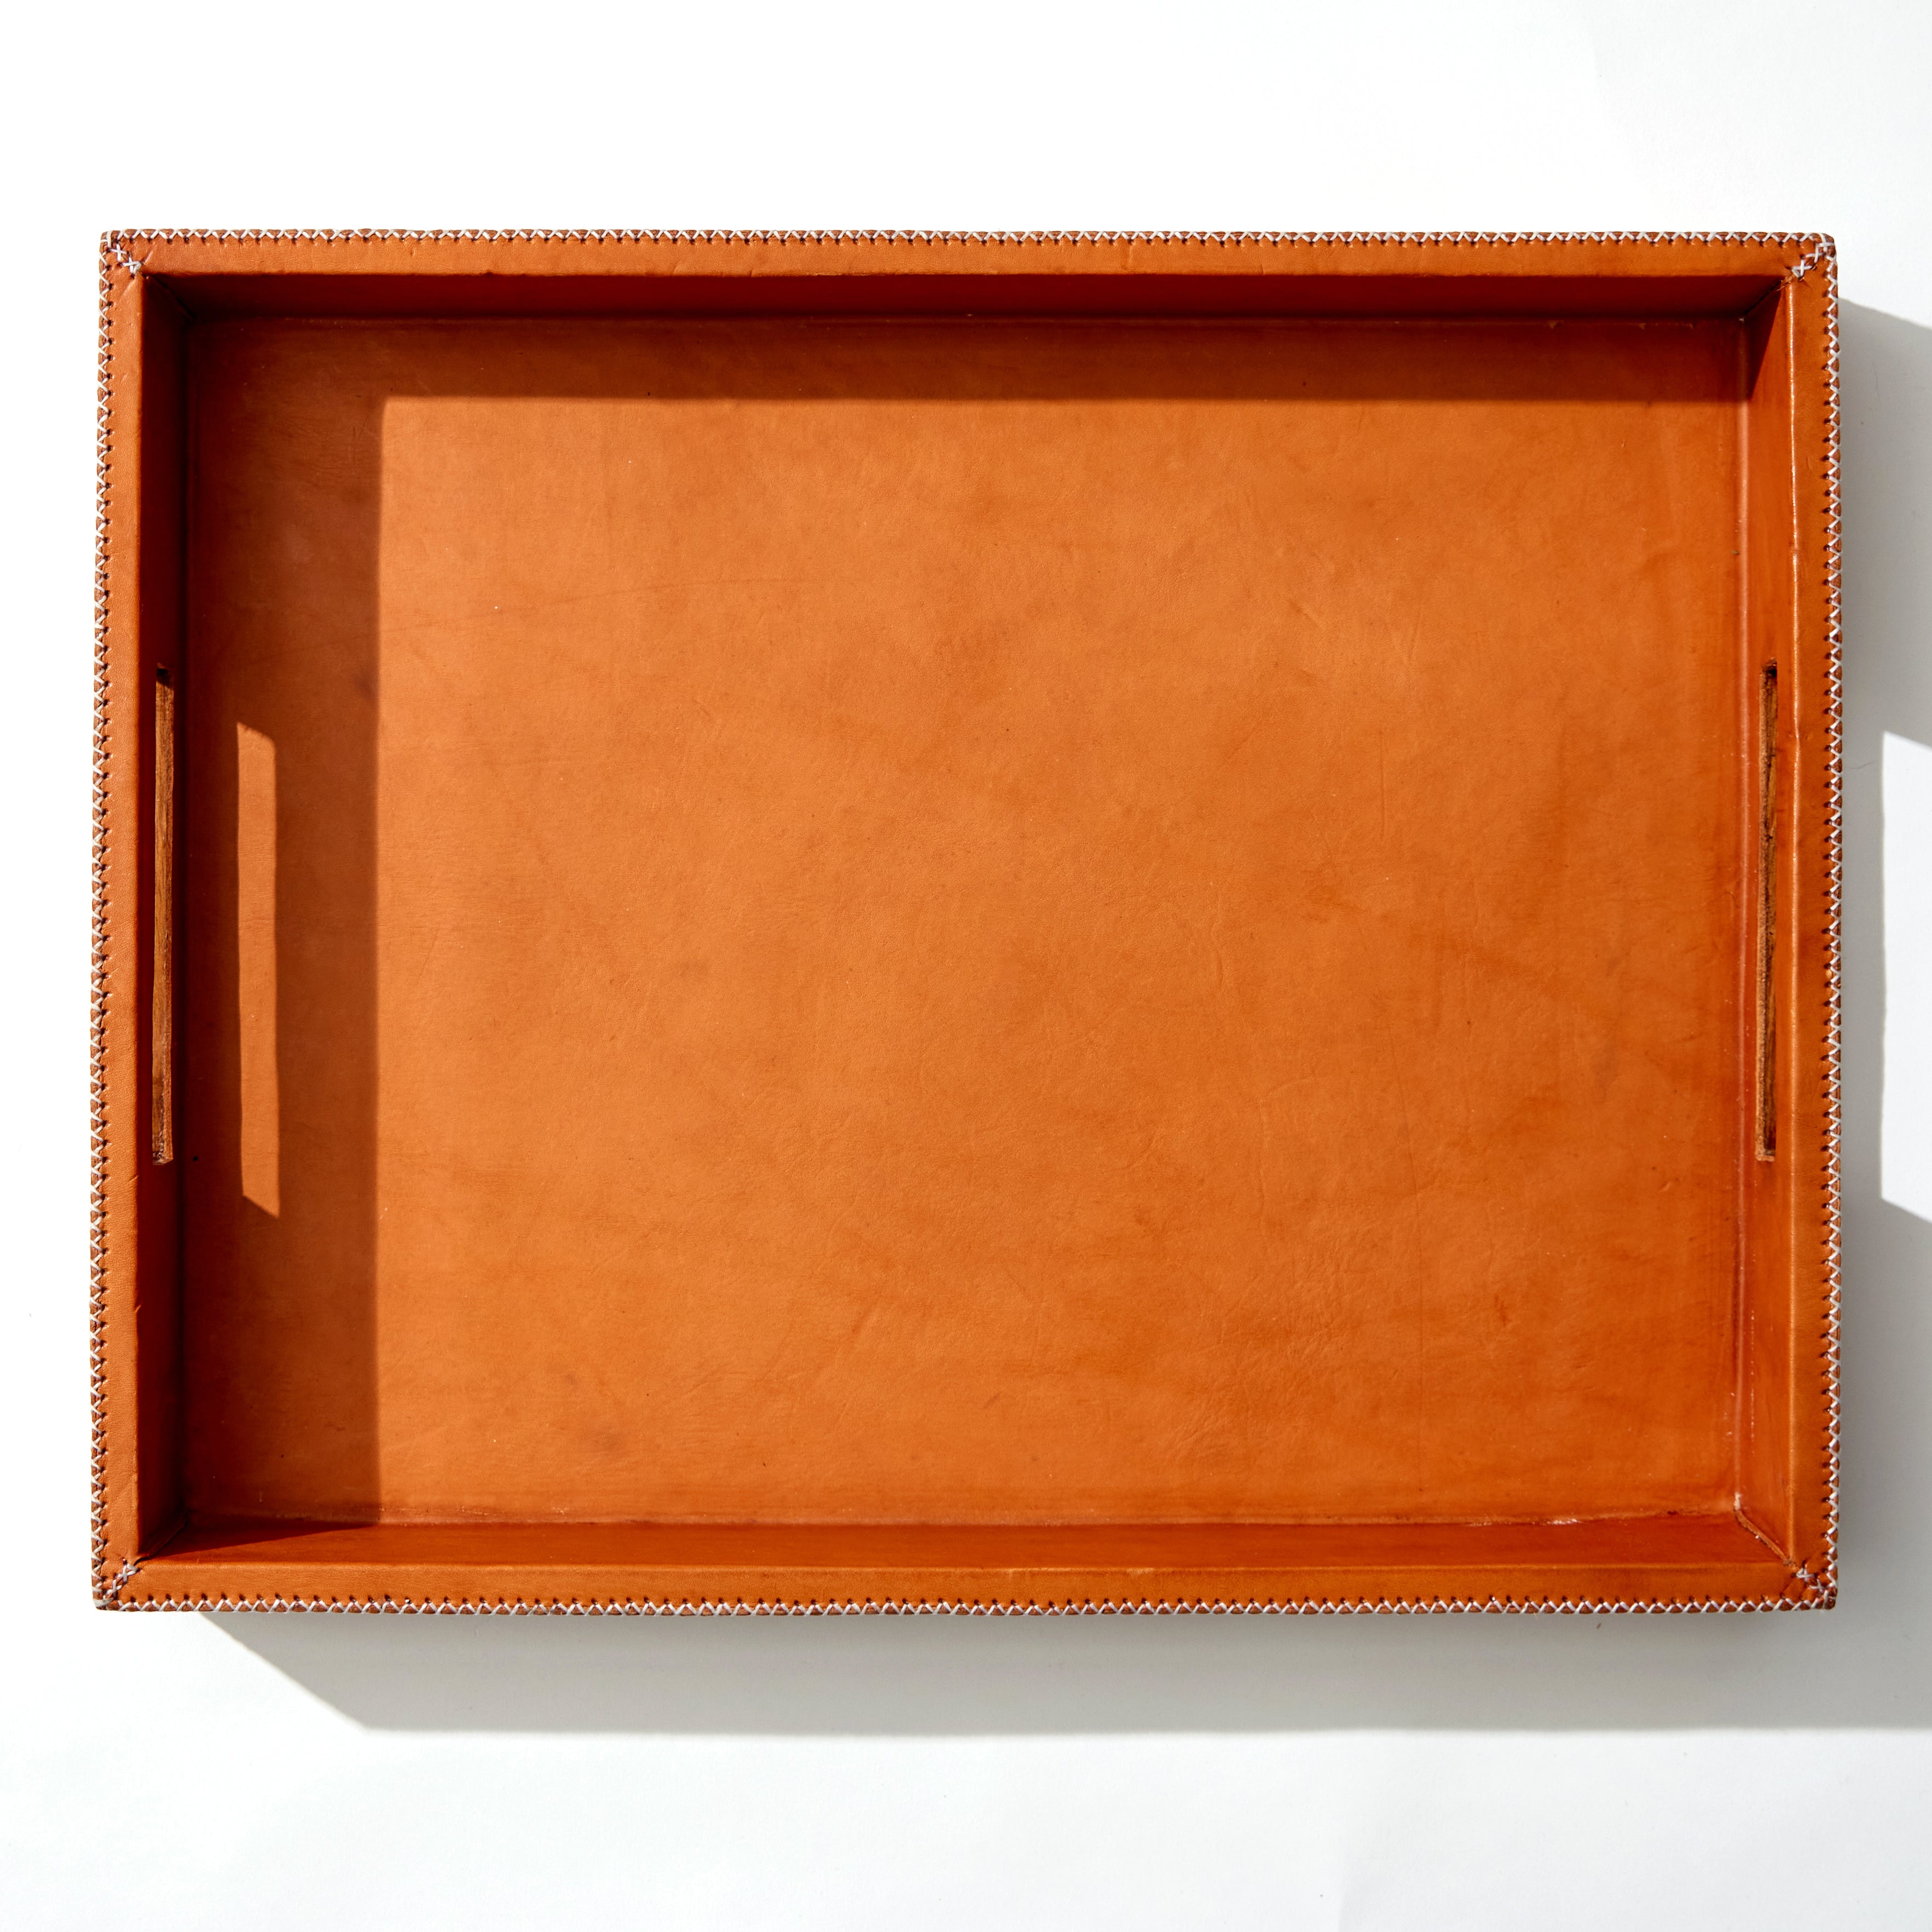 Over Head Photo of Our Large Tan Leather Tray With Hand Stitched White Thread. Handles Are Rectangle Cut Outs On Each Side.